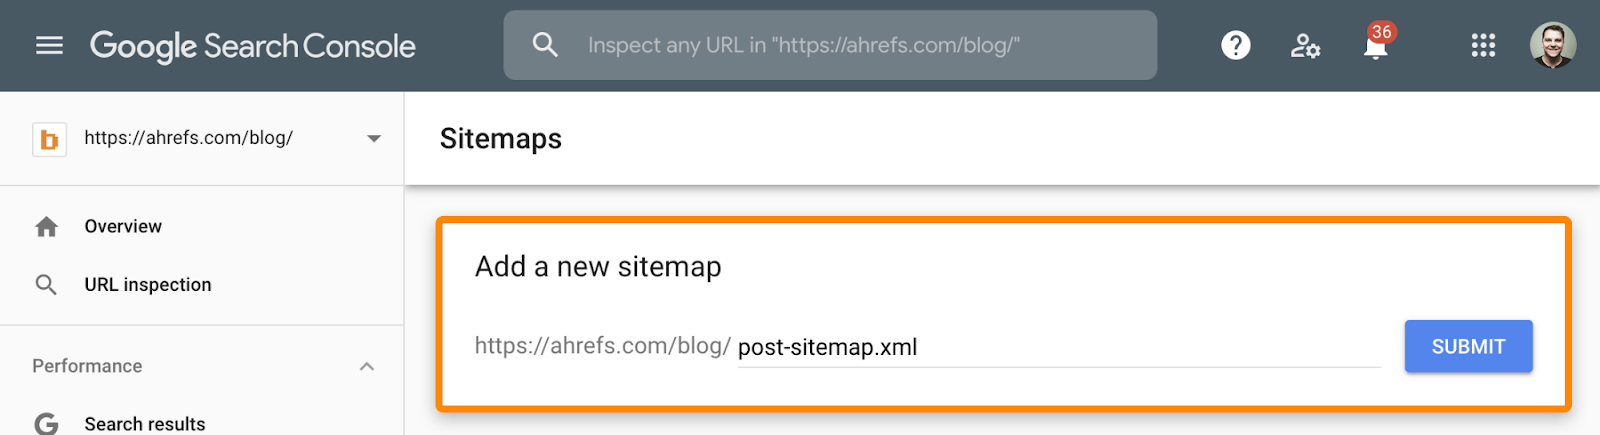 13 sitemap search console